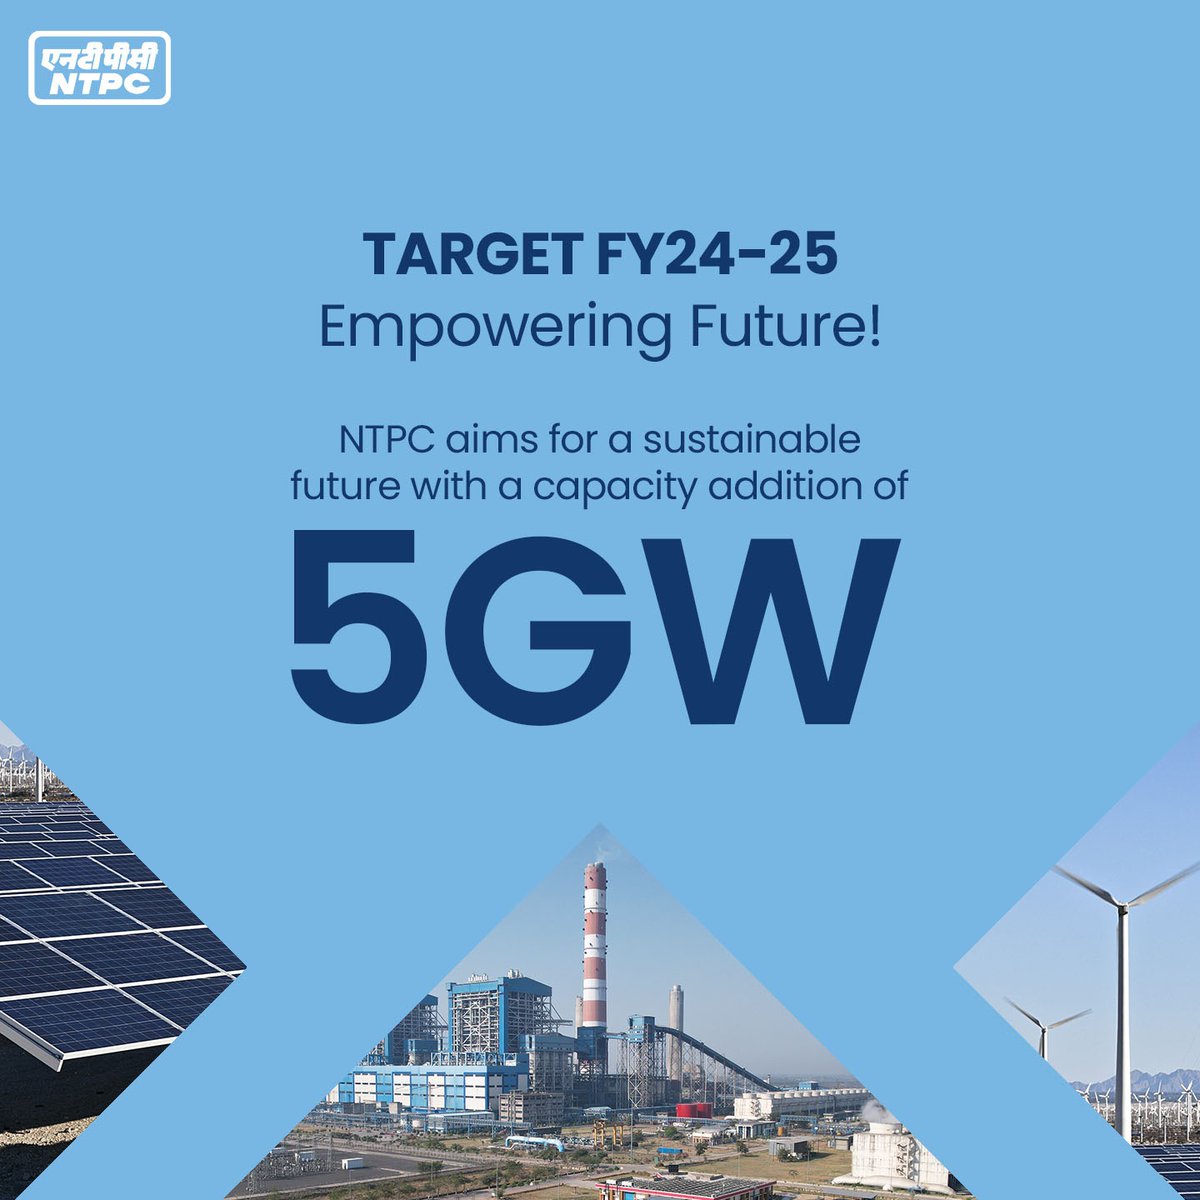 In FY25, NTPC aims to add 5 GW capacity, strengthening India's energy security . This includes 3 GW RE portfolio and 2GW thermal capacity. NTPC is committed to providing clean, reliable and affordable energy for a sustainable future. #CapacityAddition #RenewableEnergy